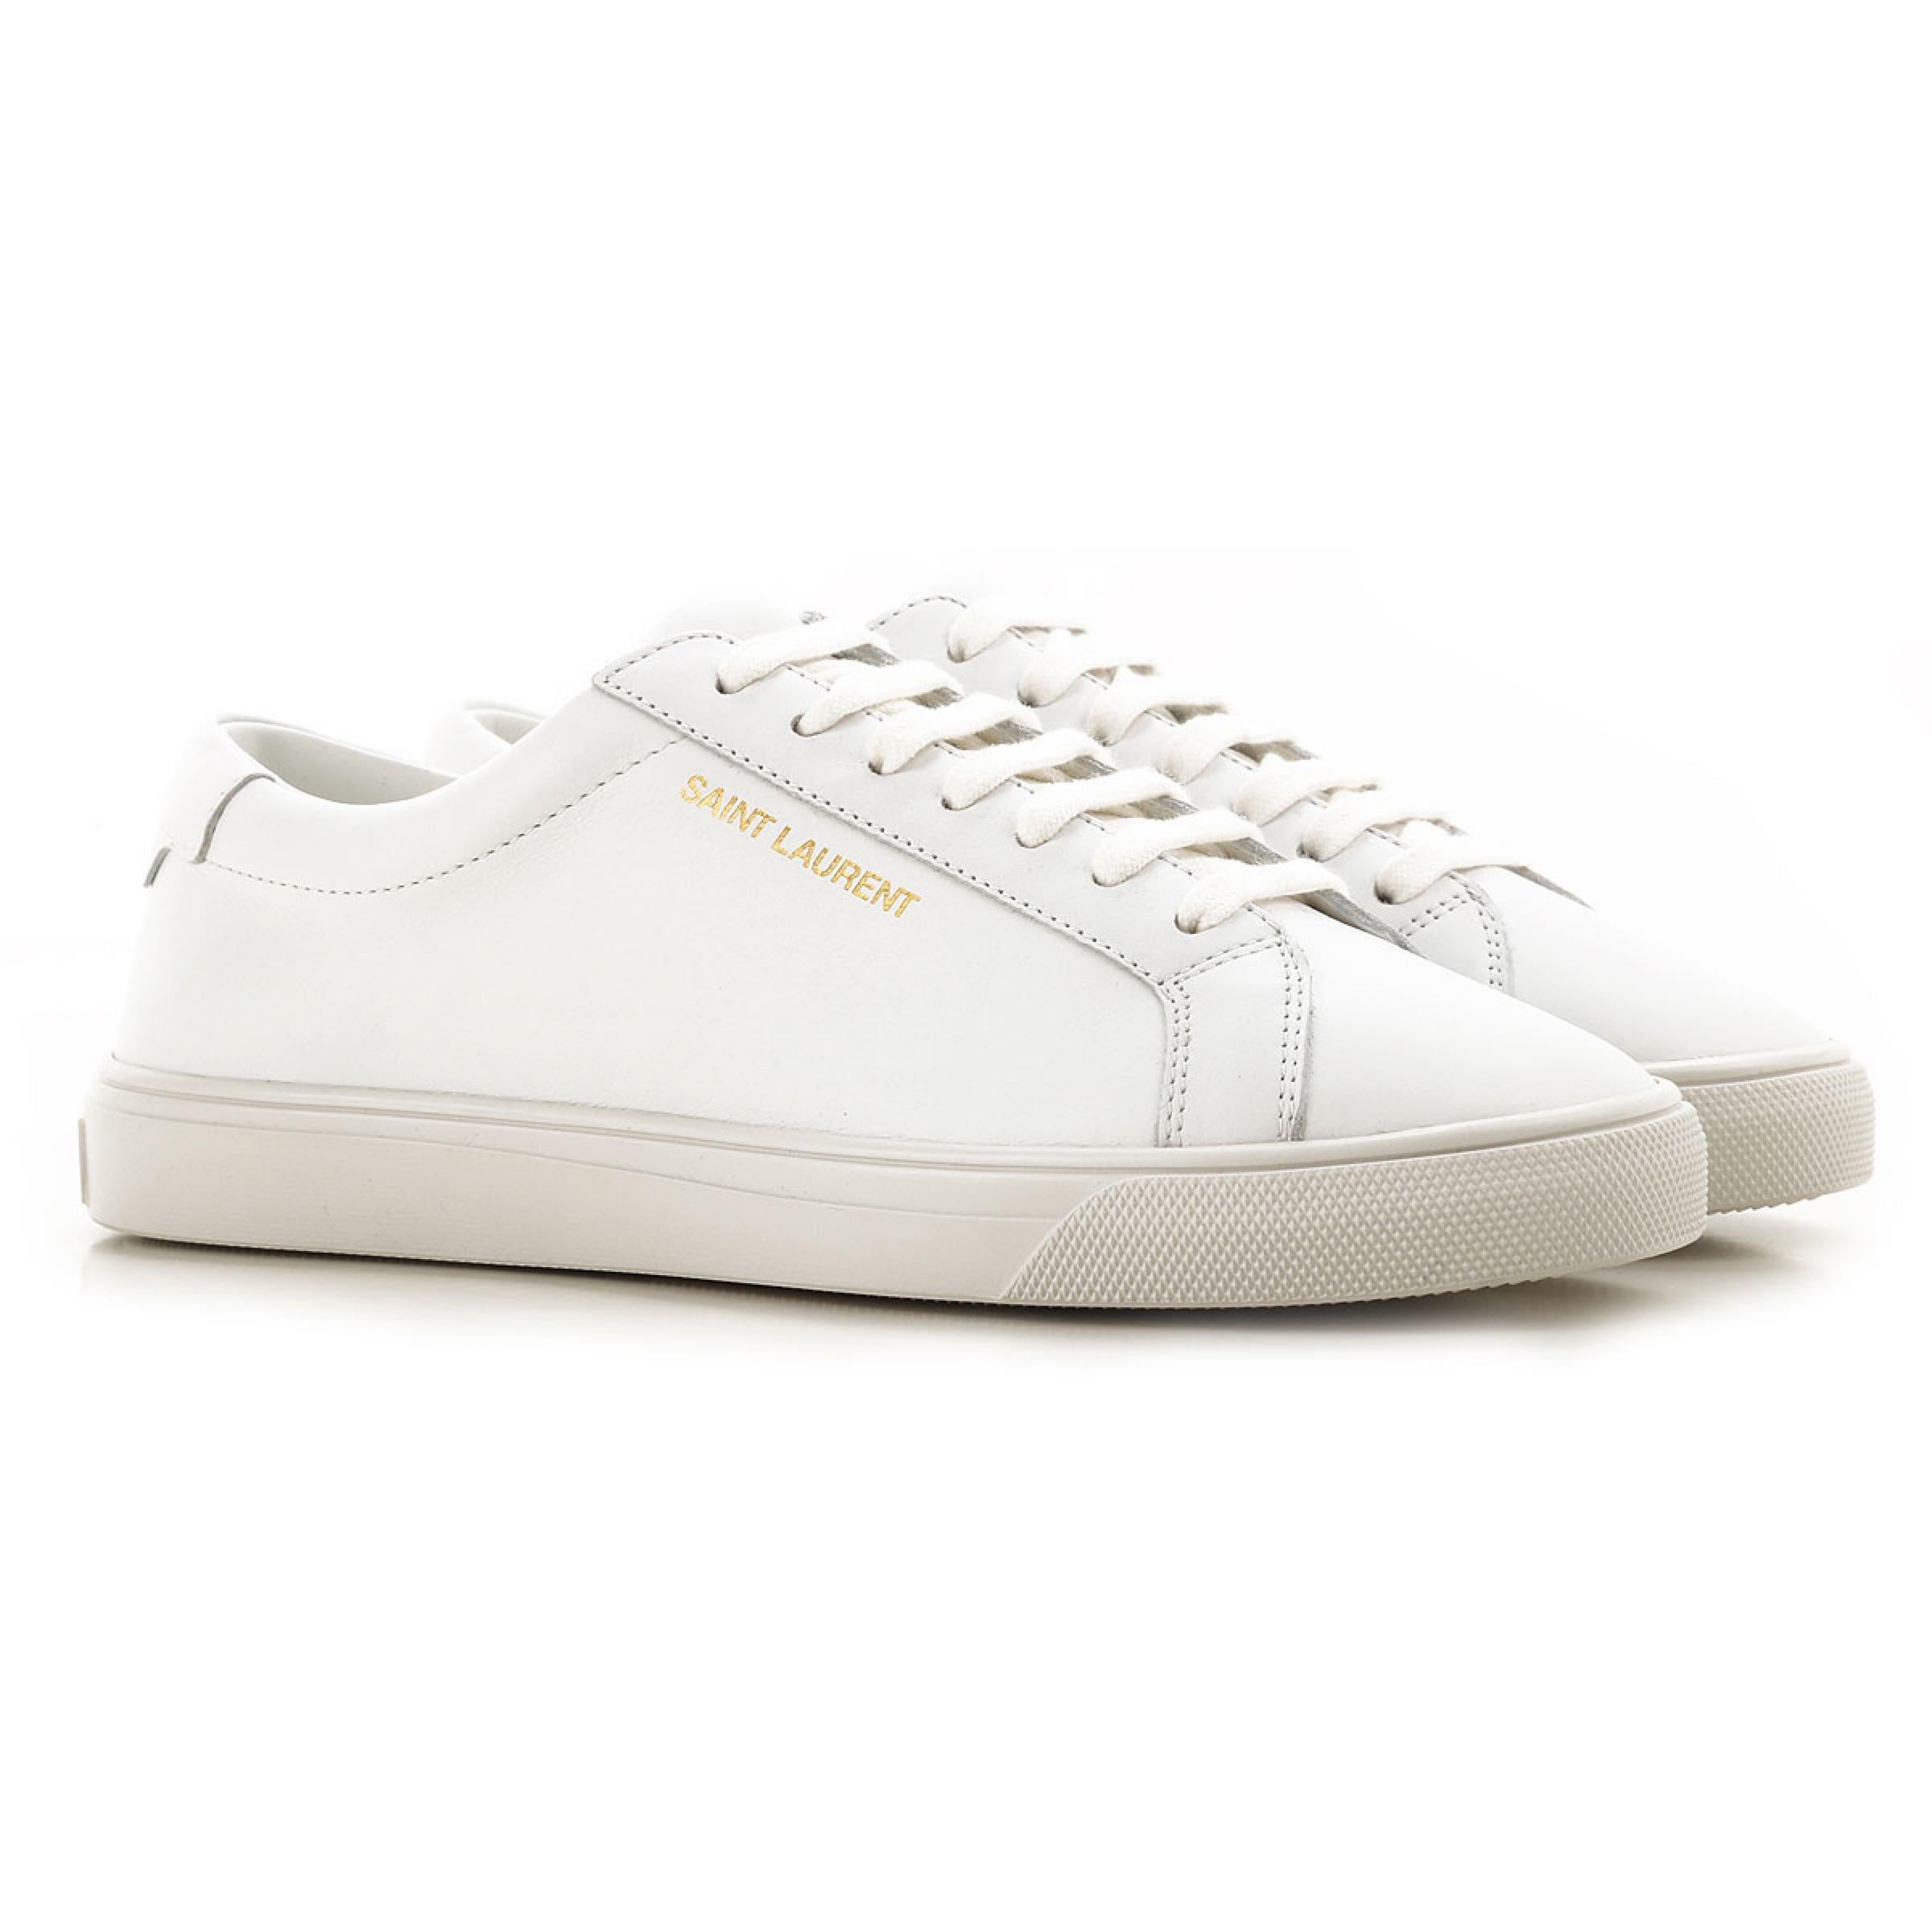 New Saint Laurent White Andy Leather Sneakers Size 39.5 EU 9.5 US

Authenticity Guaranteed

DETAILS
Brand: Saint Laurent
Condition: Brand new
Gender: Women
Category: Sneakers
Color: White
Material: Leather
Logo print in gold
Rubber sole
Made in